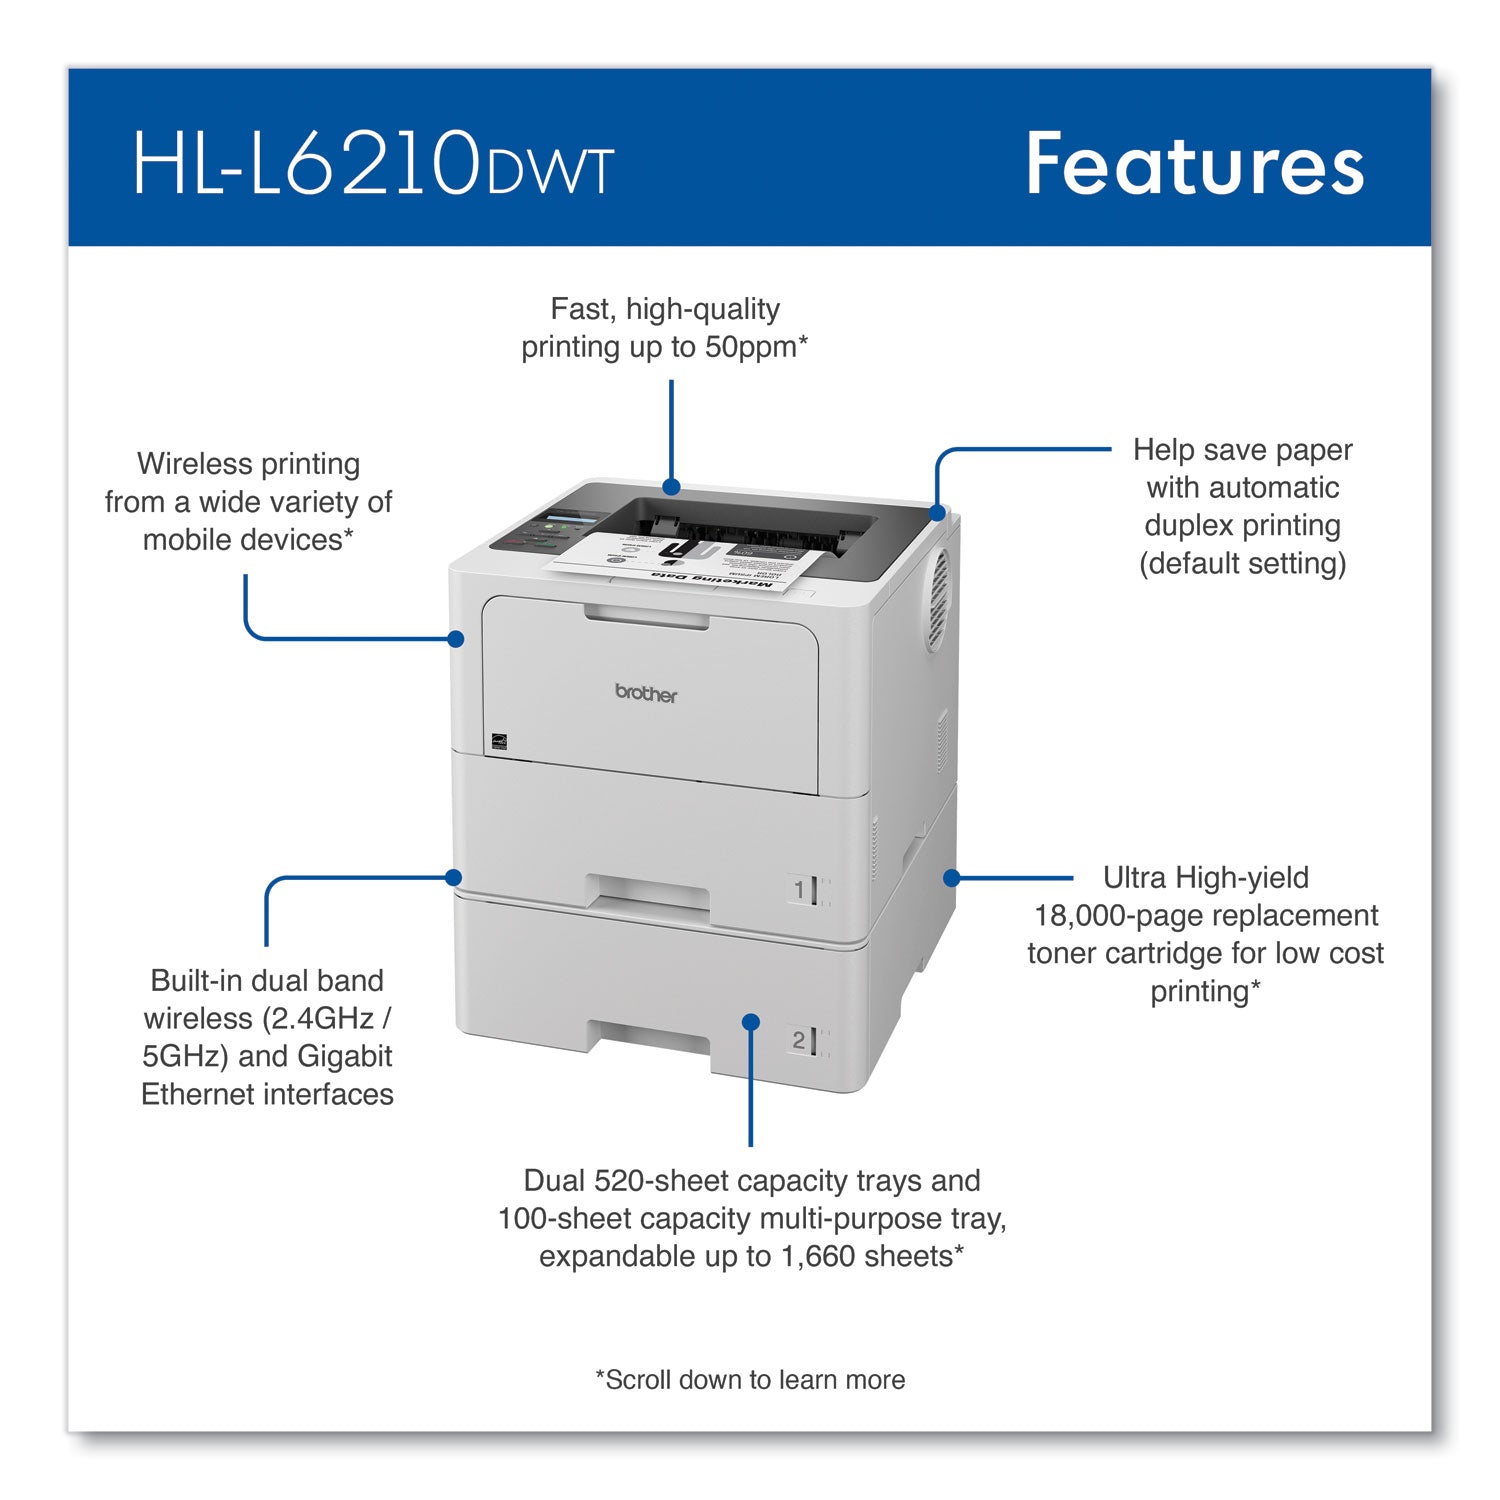 hl-l6210dwt-business-monochrome-laser-printer-with-dual-paper-trays_brthll6210dwt - 1